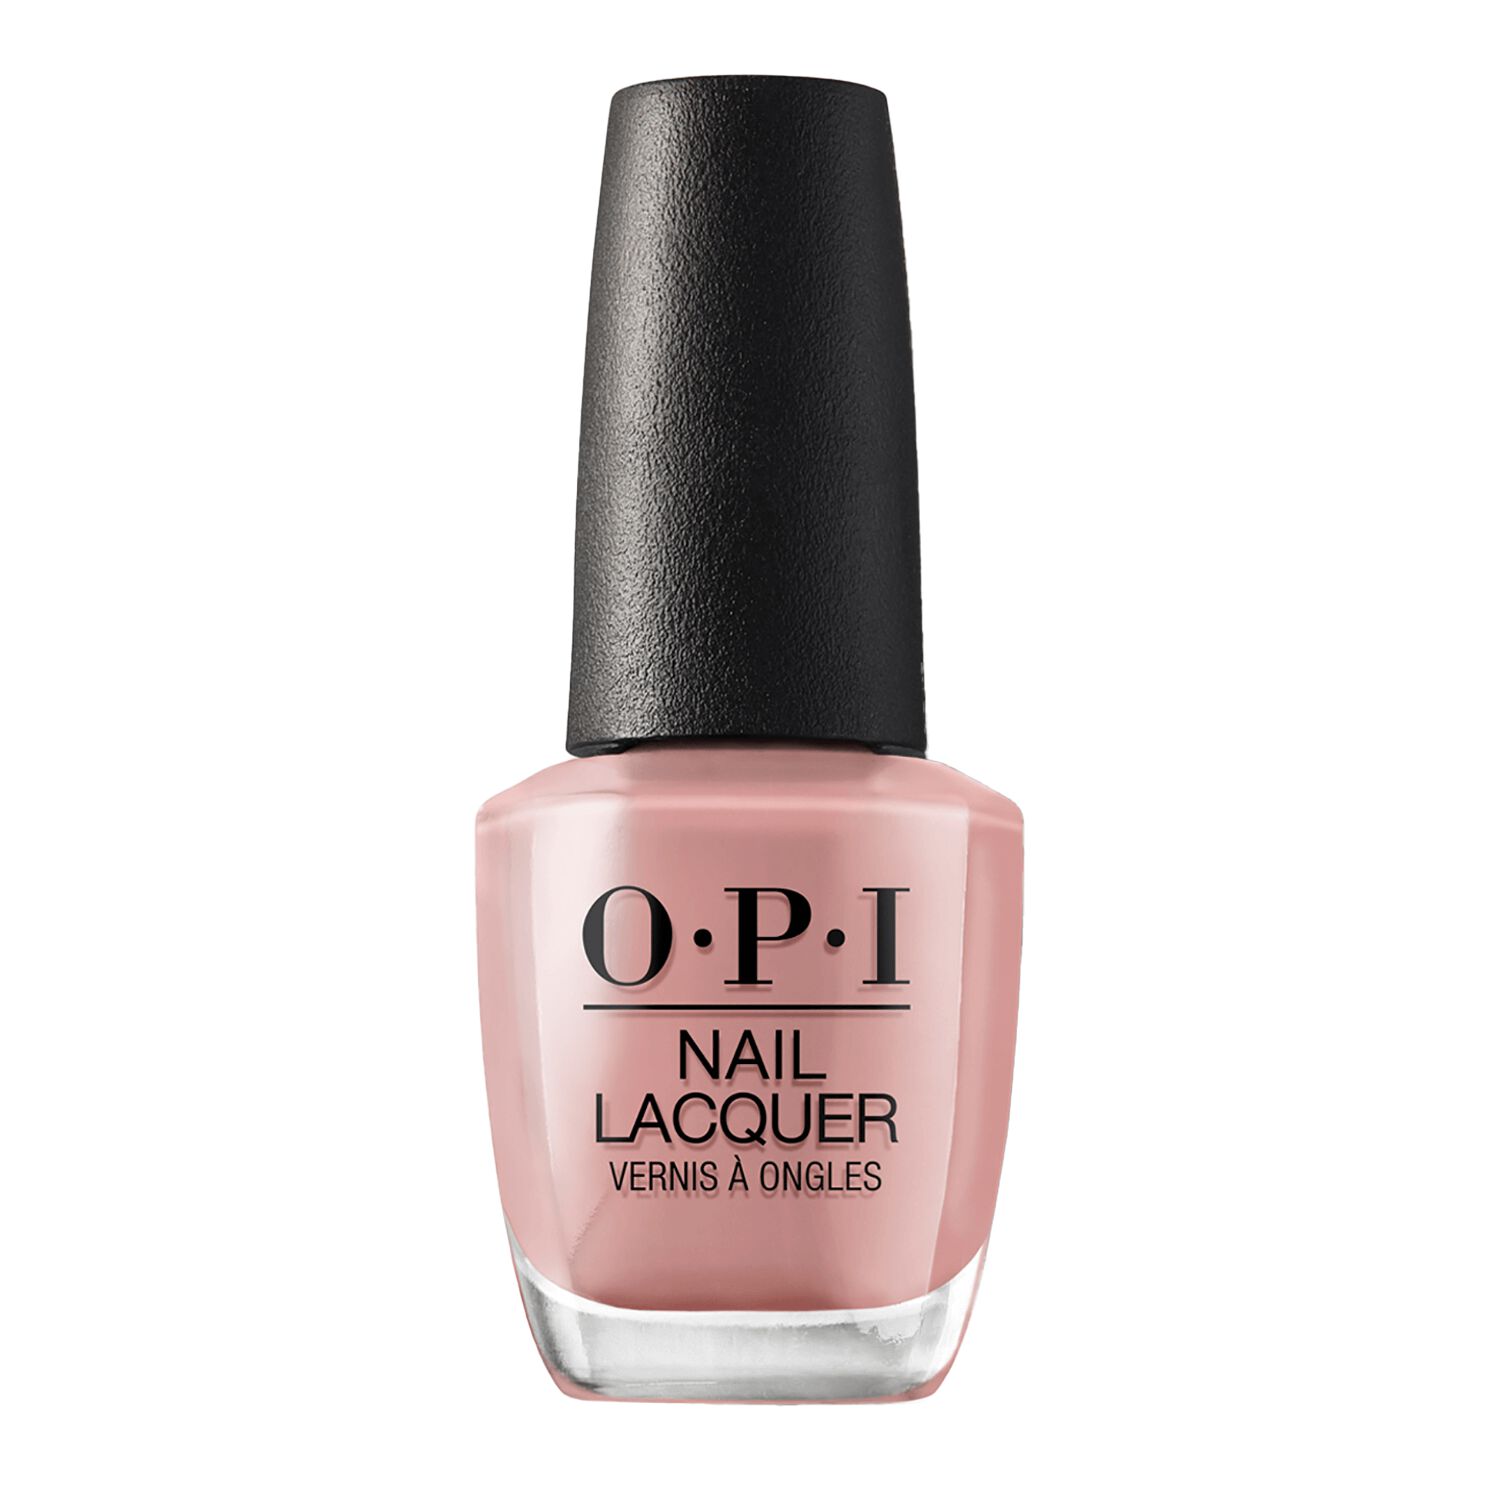 OPI Nail Lacquer in Barefoot in Barcelona - OPI Nail Polish | Sally Beauty